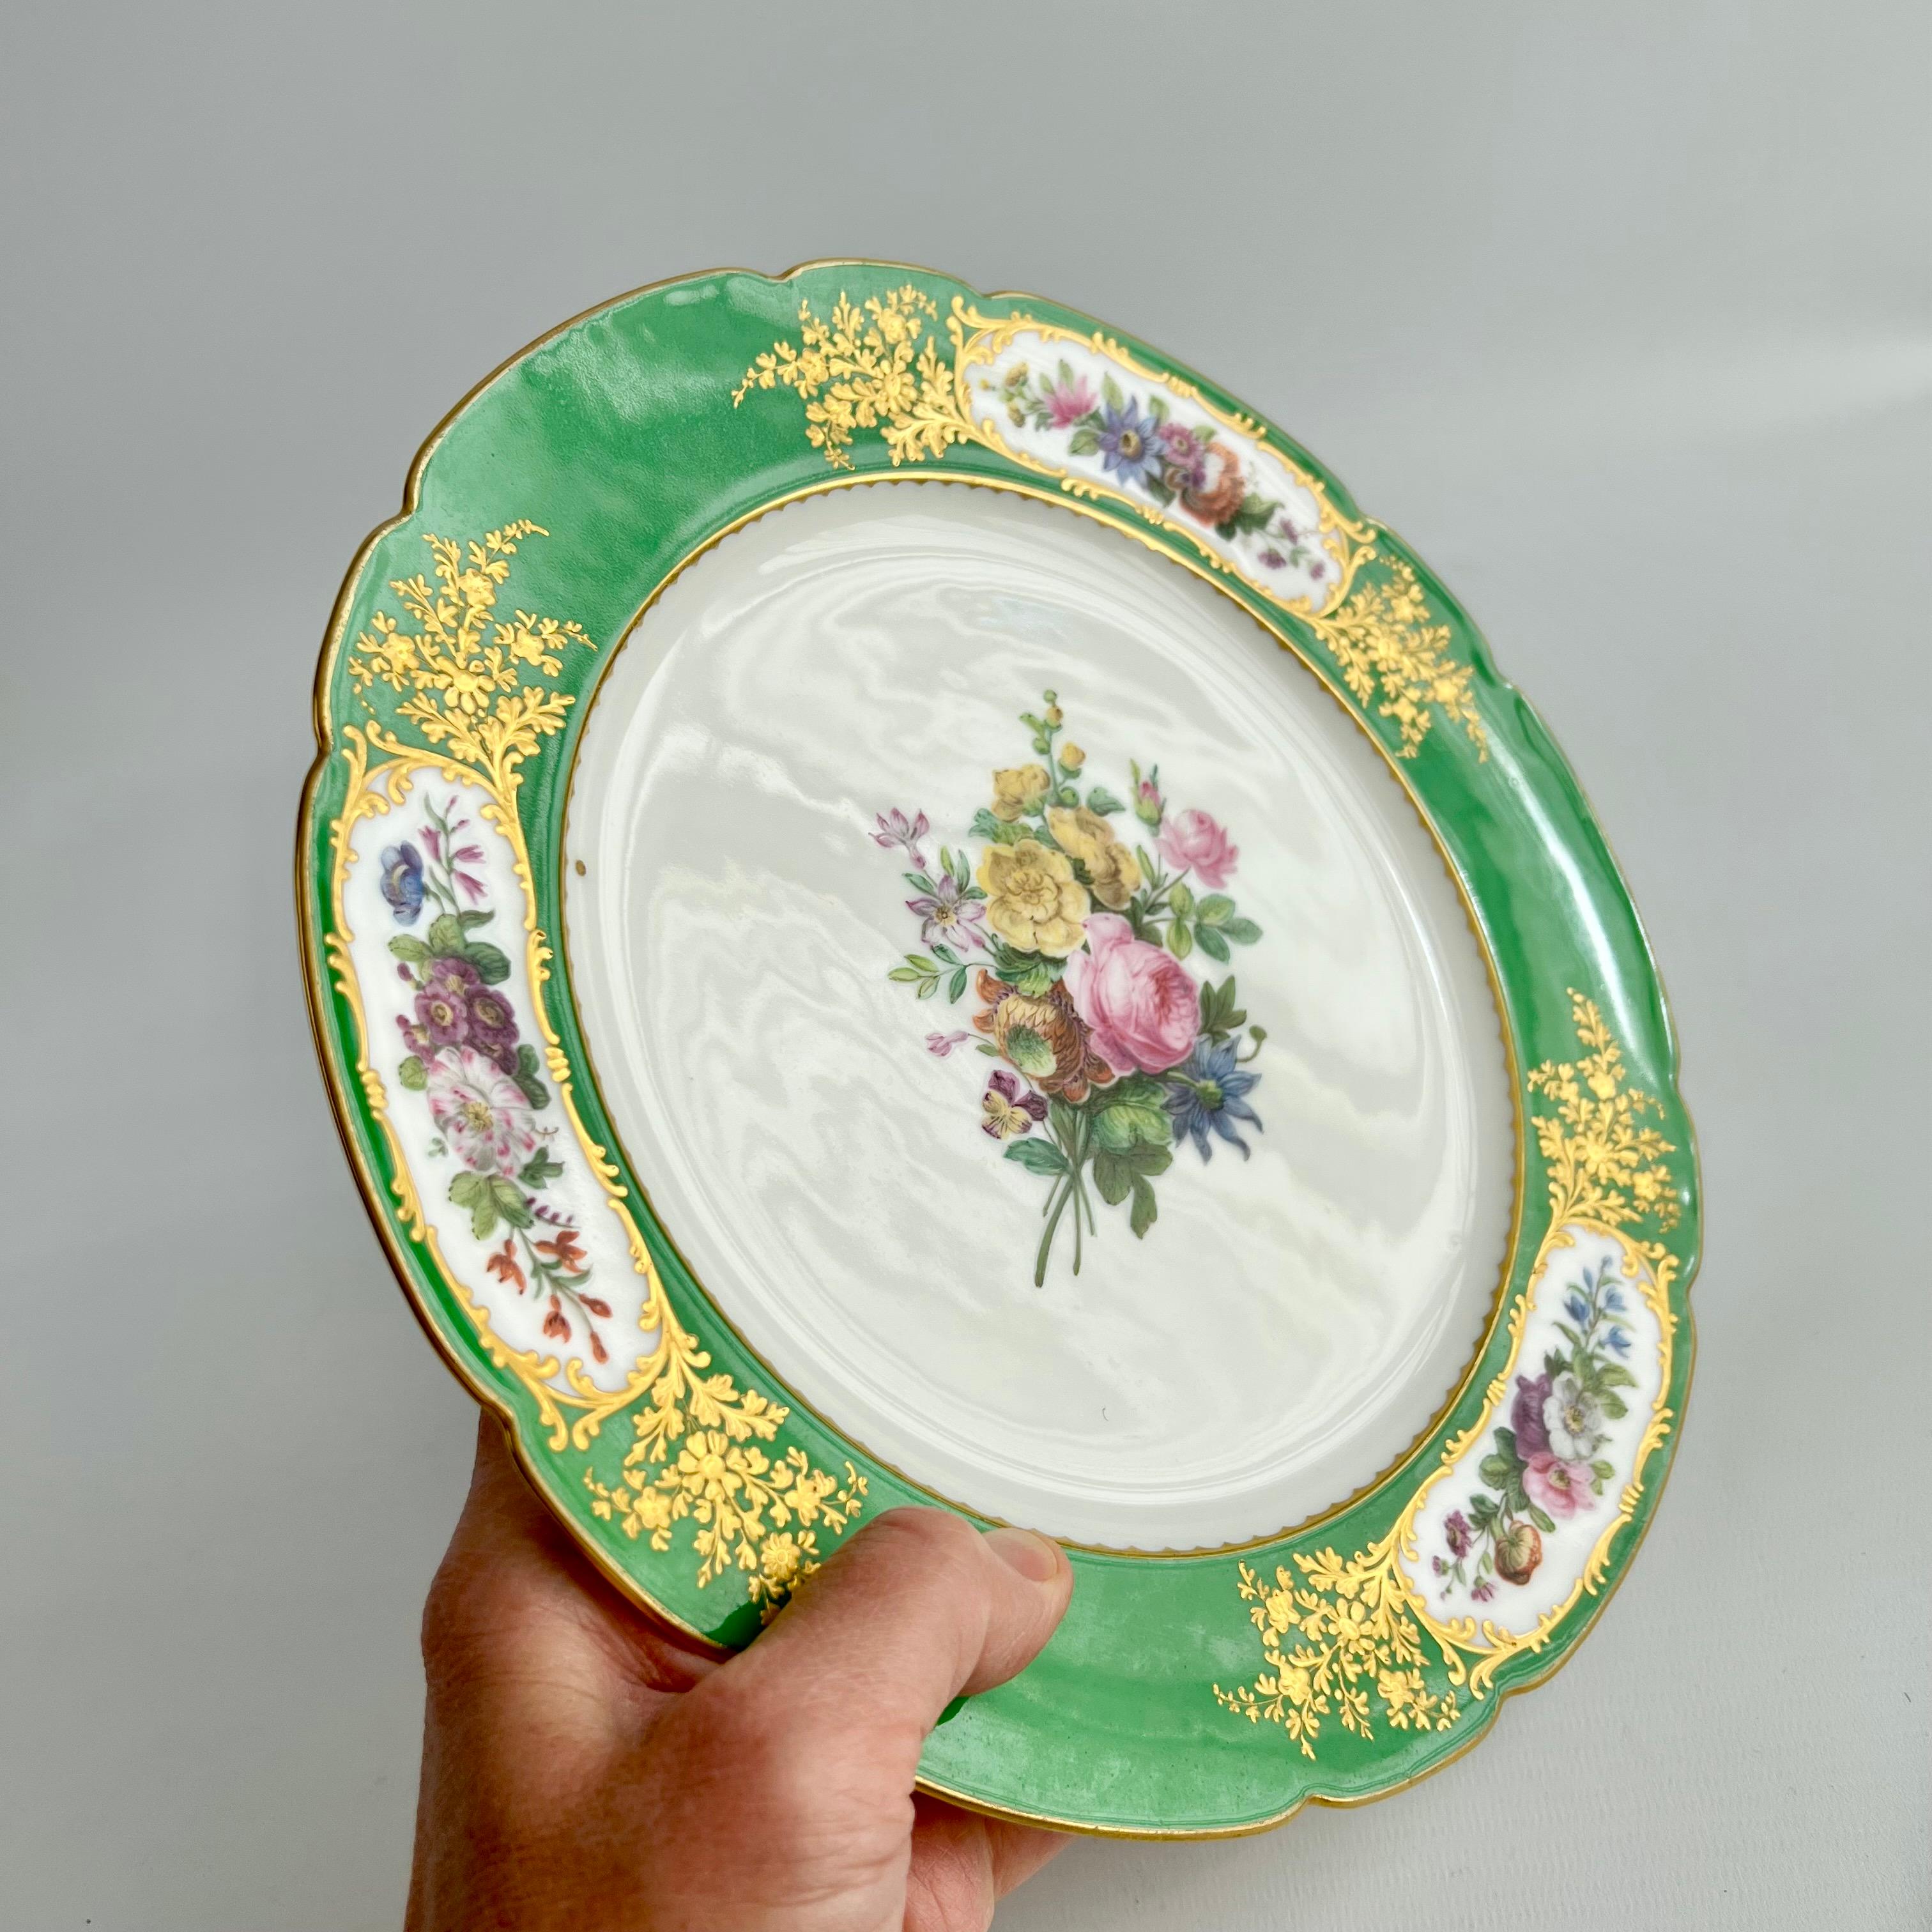 This is a rare and stunning set of 6 plates decorated by the Atelier Feuillet in Paris between 1817 and 1834.

Jean-Pierre Feuillet was born in 1777 as the son of the pastry chef for the Prince de Condé. The prince ran a school in his chateau